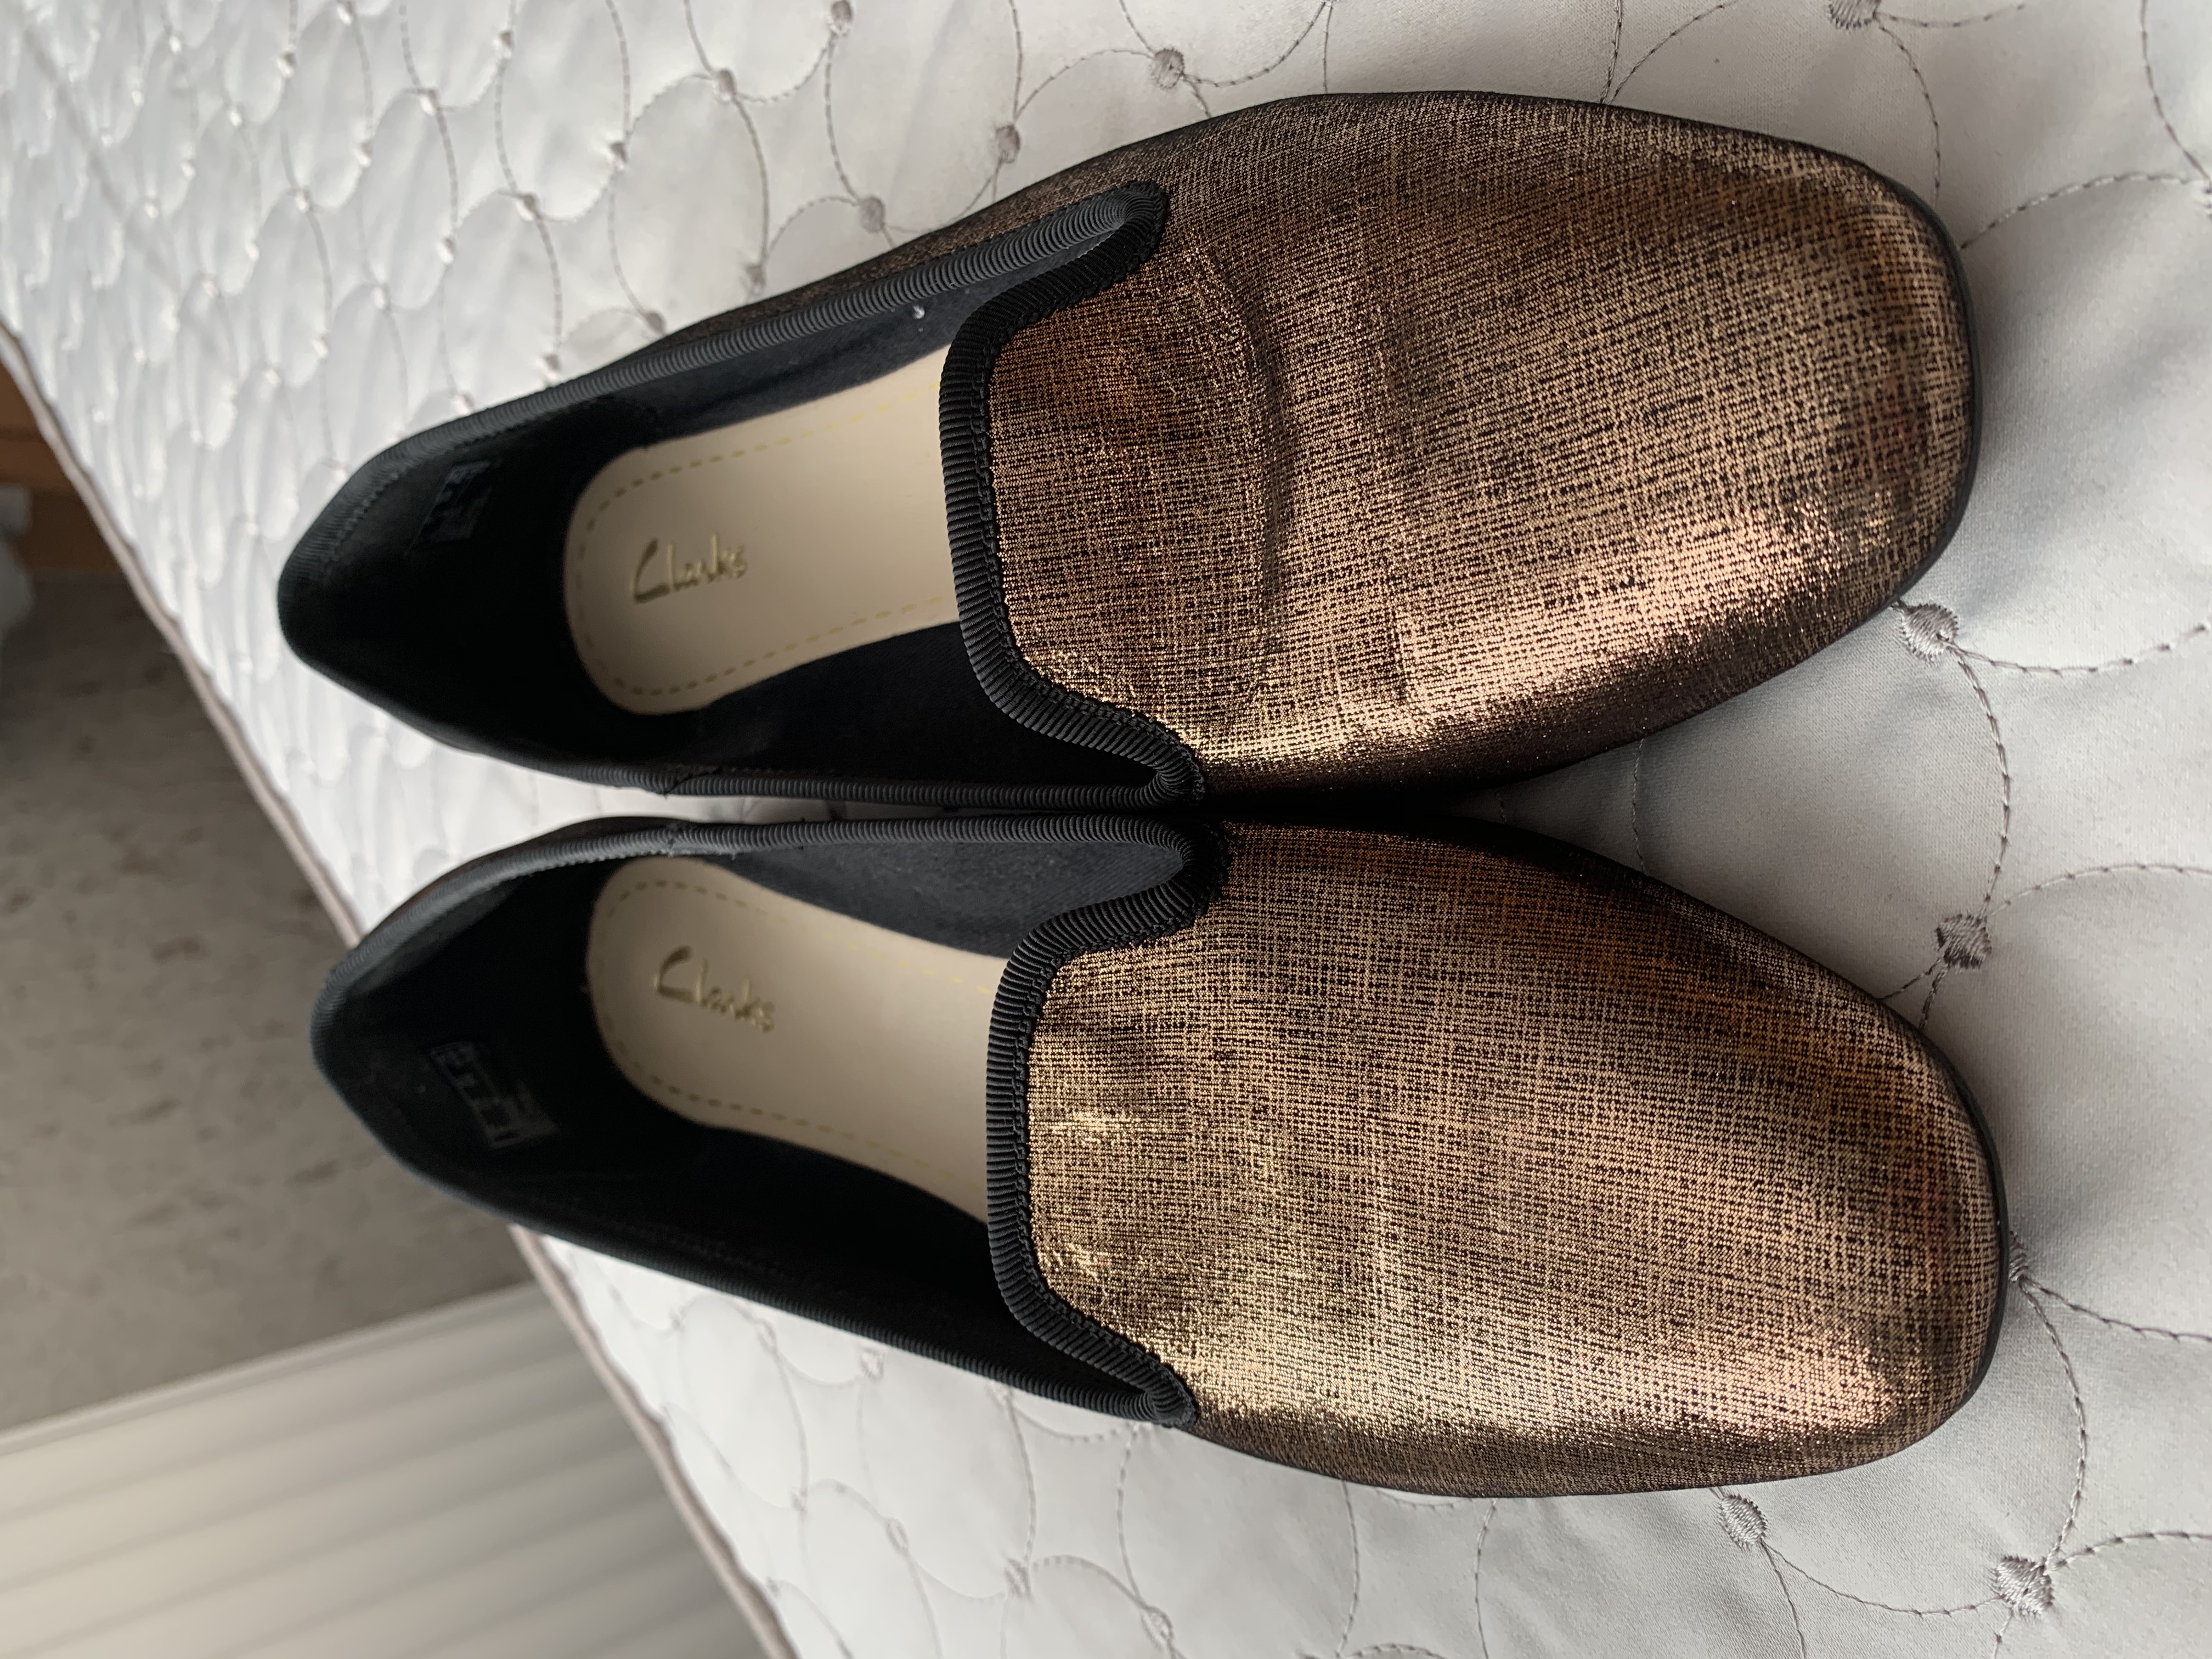 Lovely pair of flat shoes from Clarks 